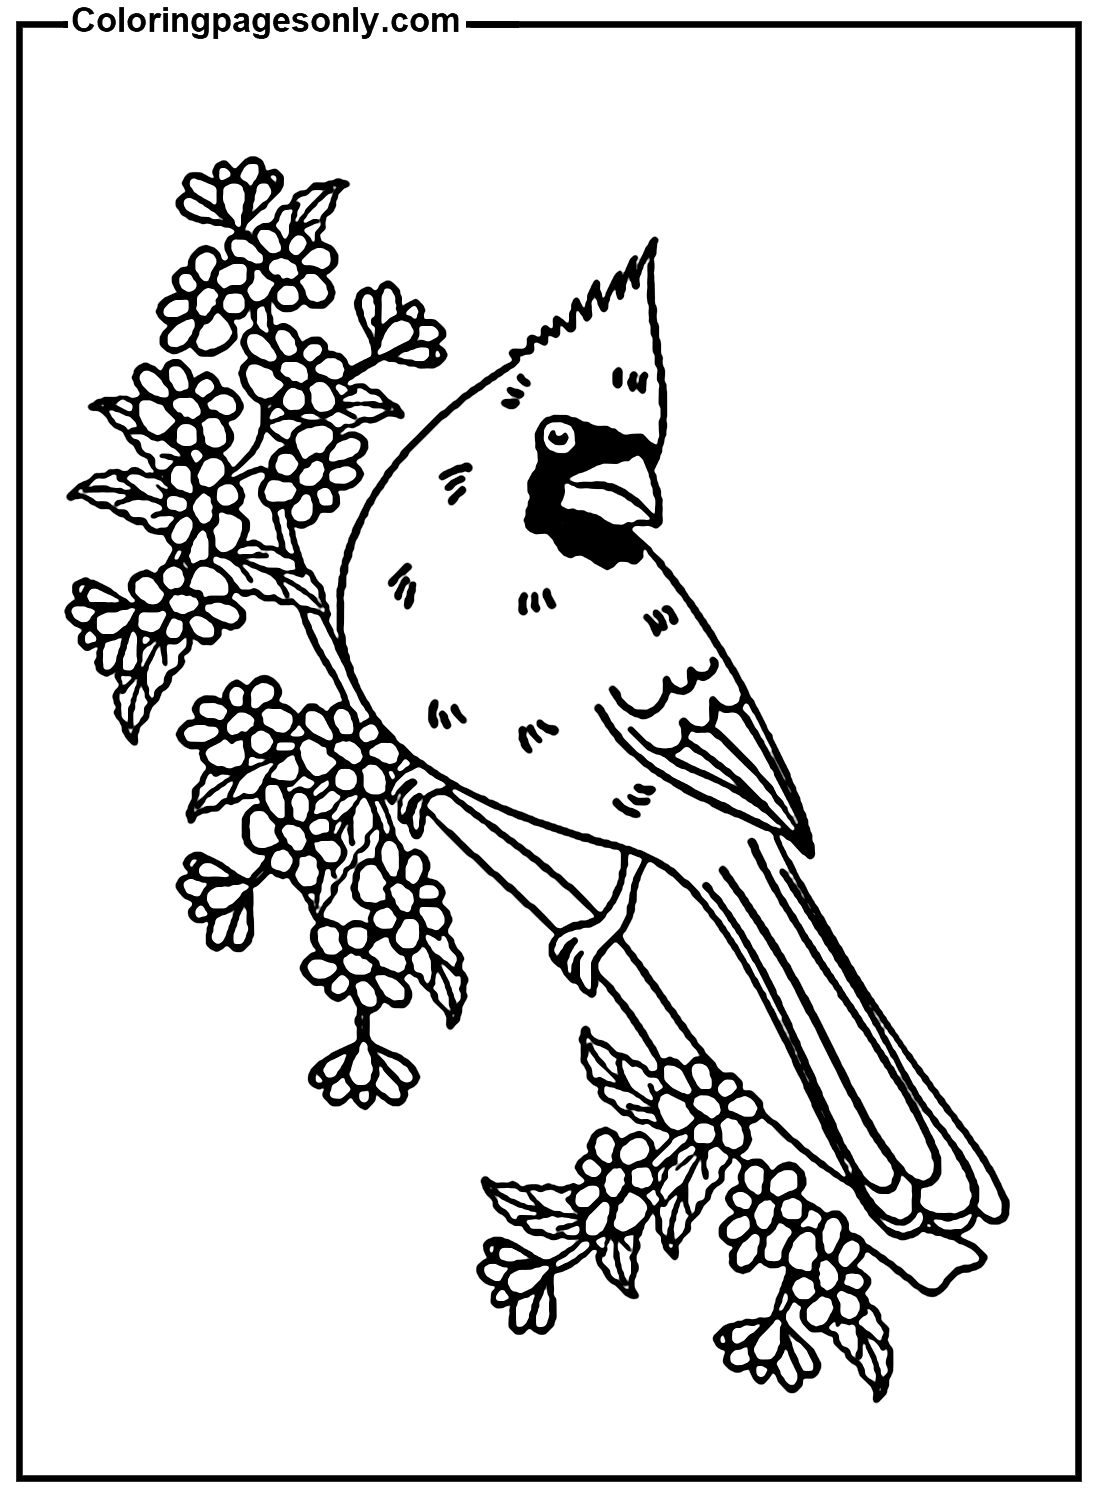 Cardinal Image Coloring Pages